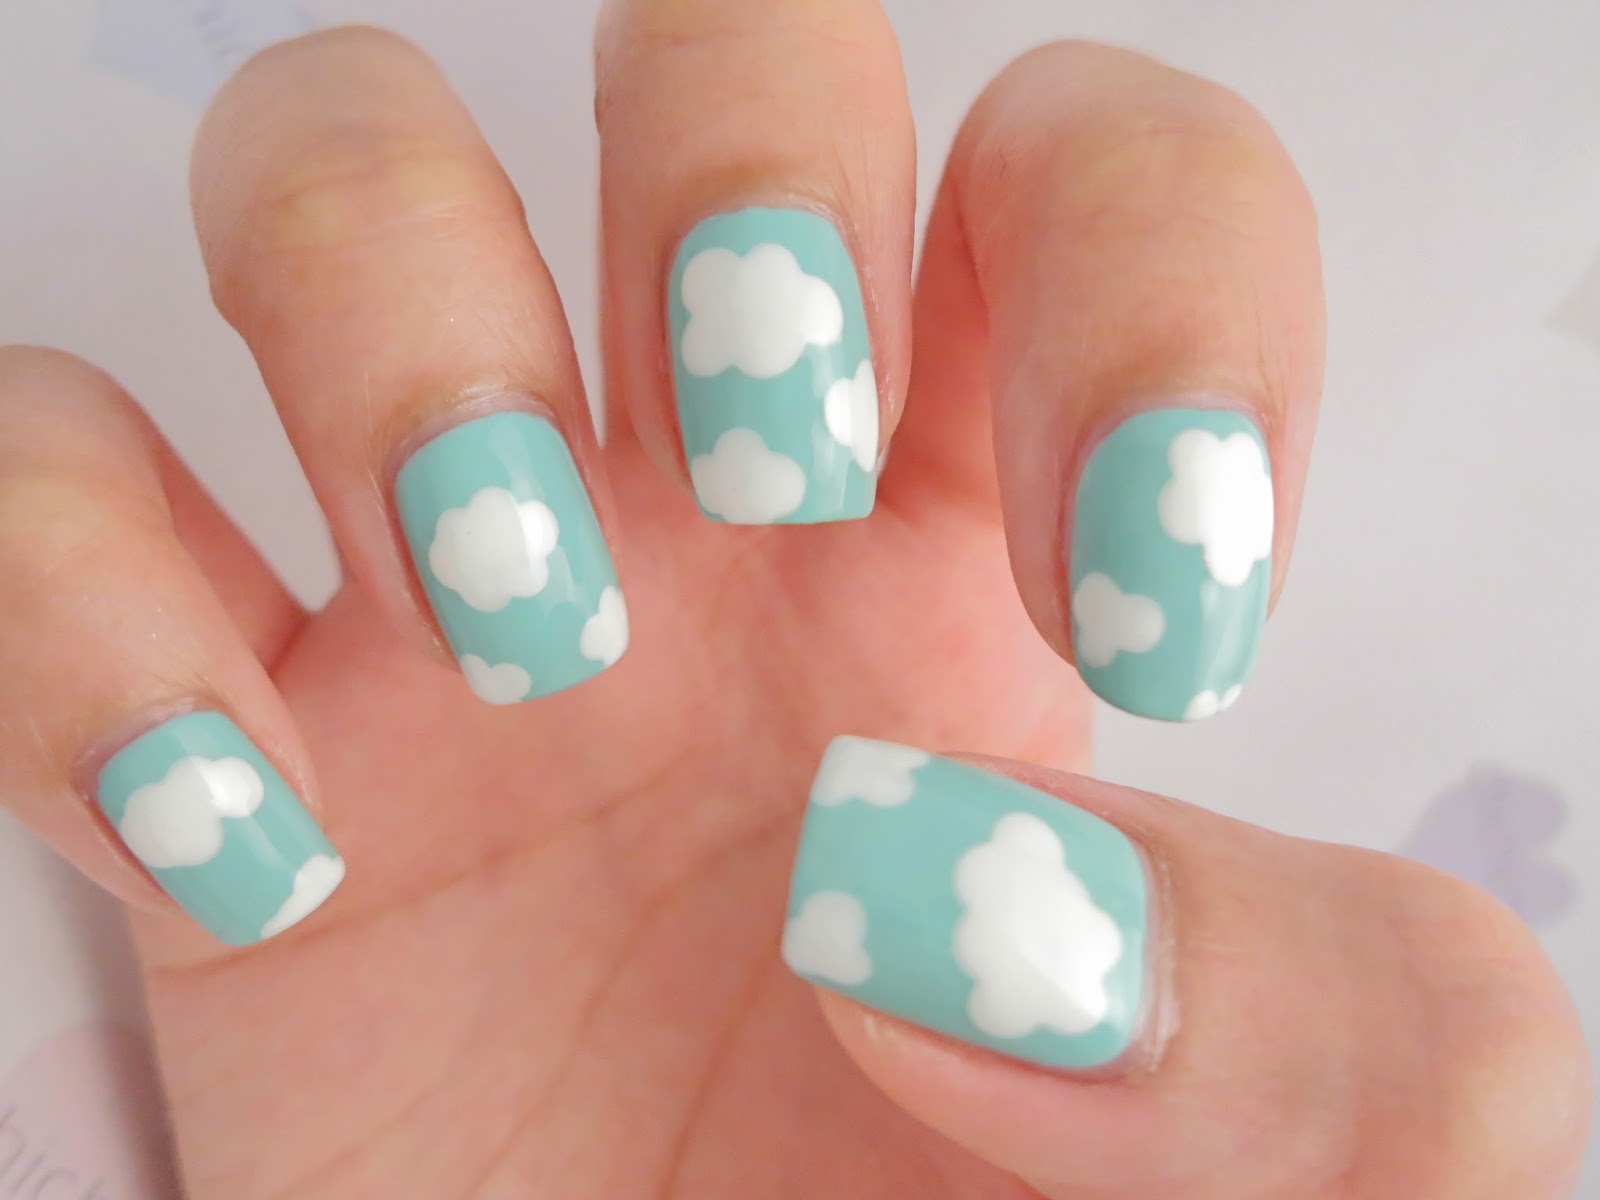 1. Cloudy Sky Nail Design - wide 4